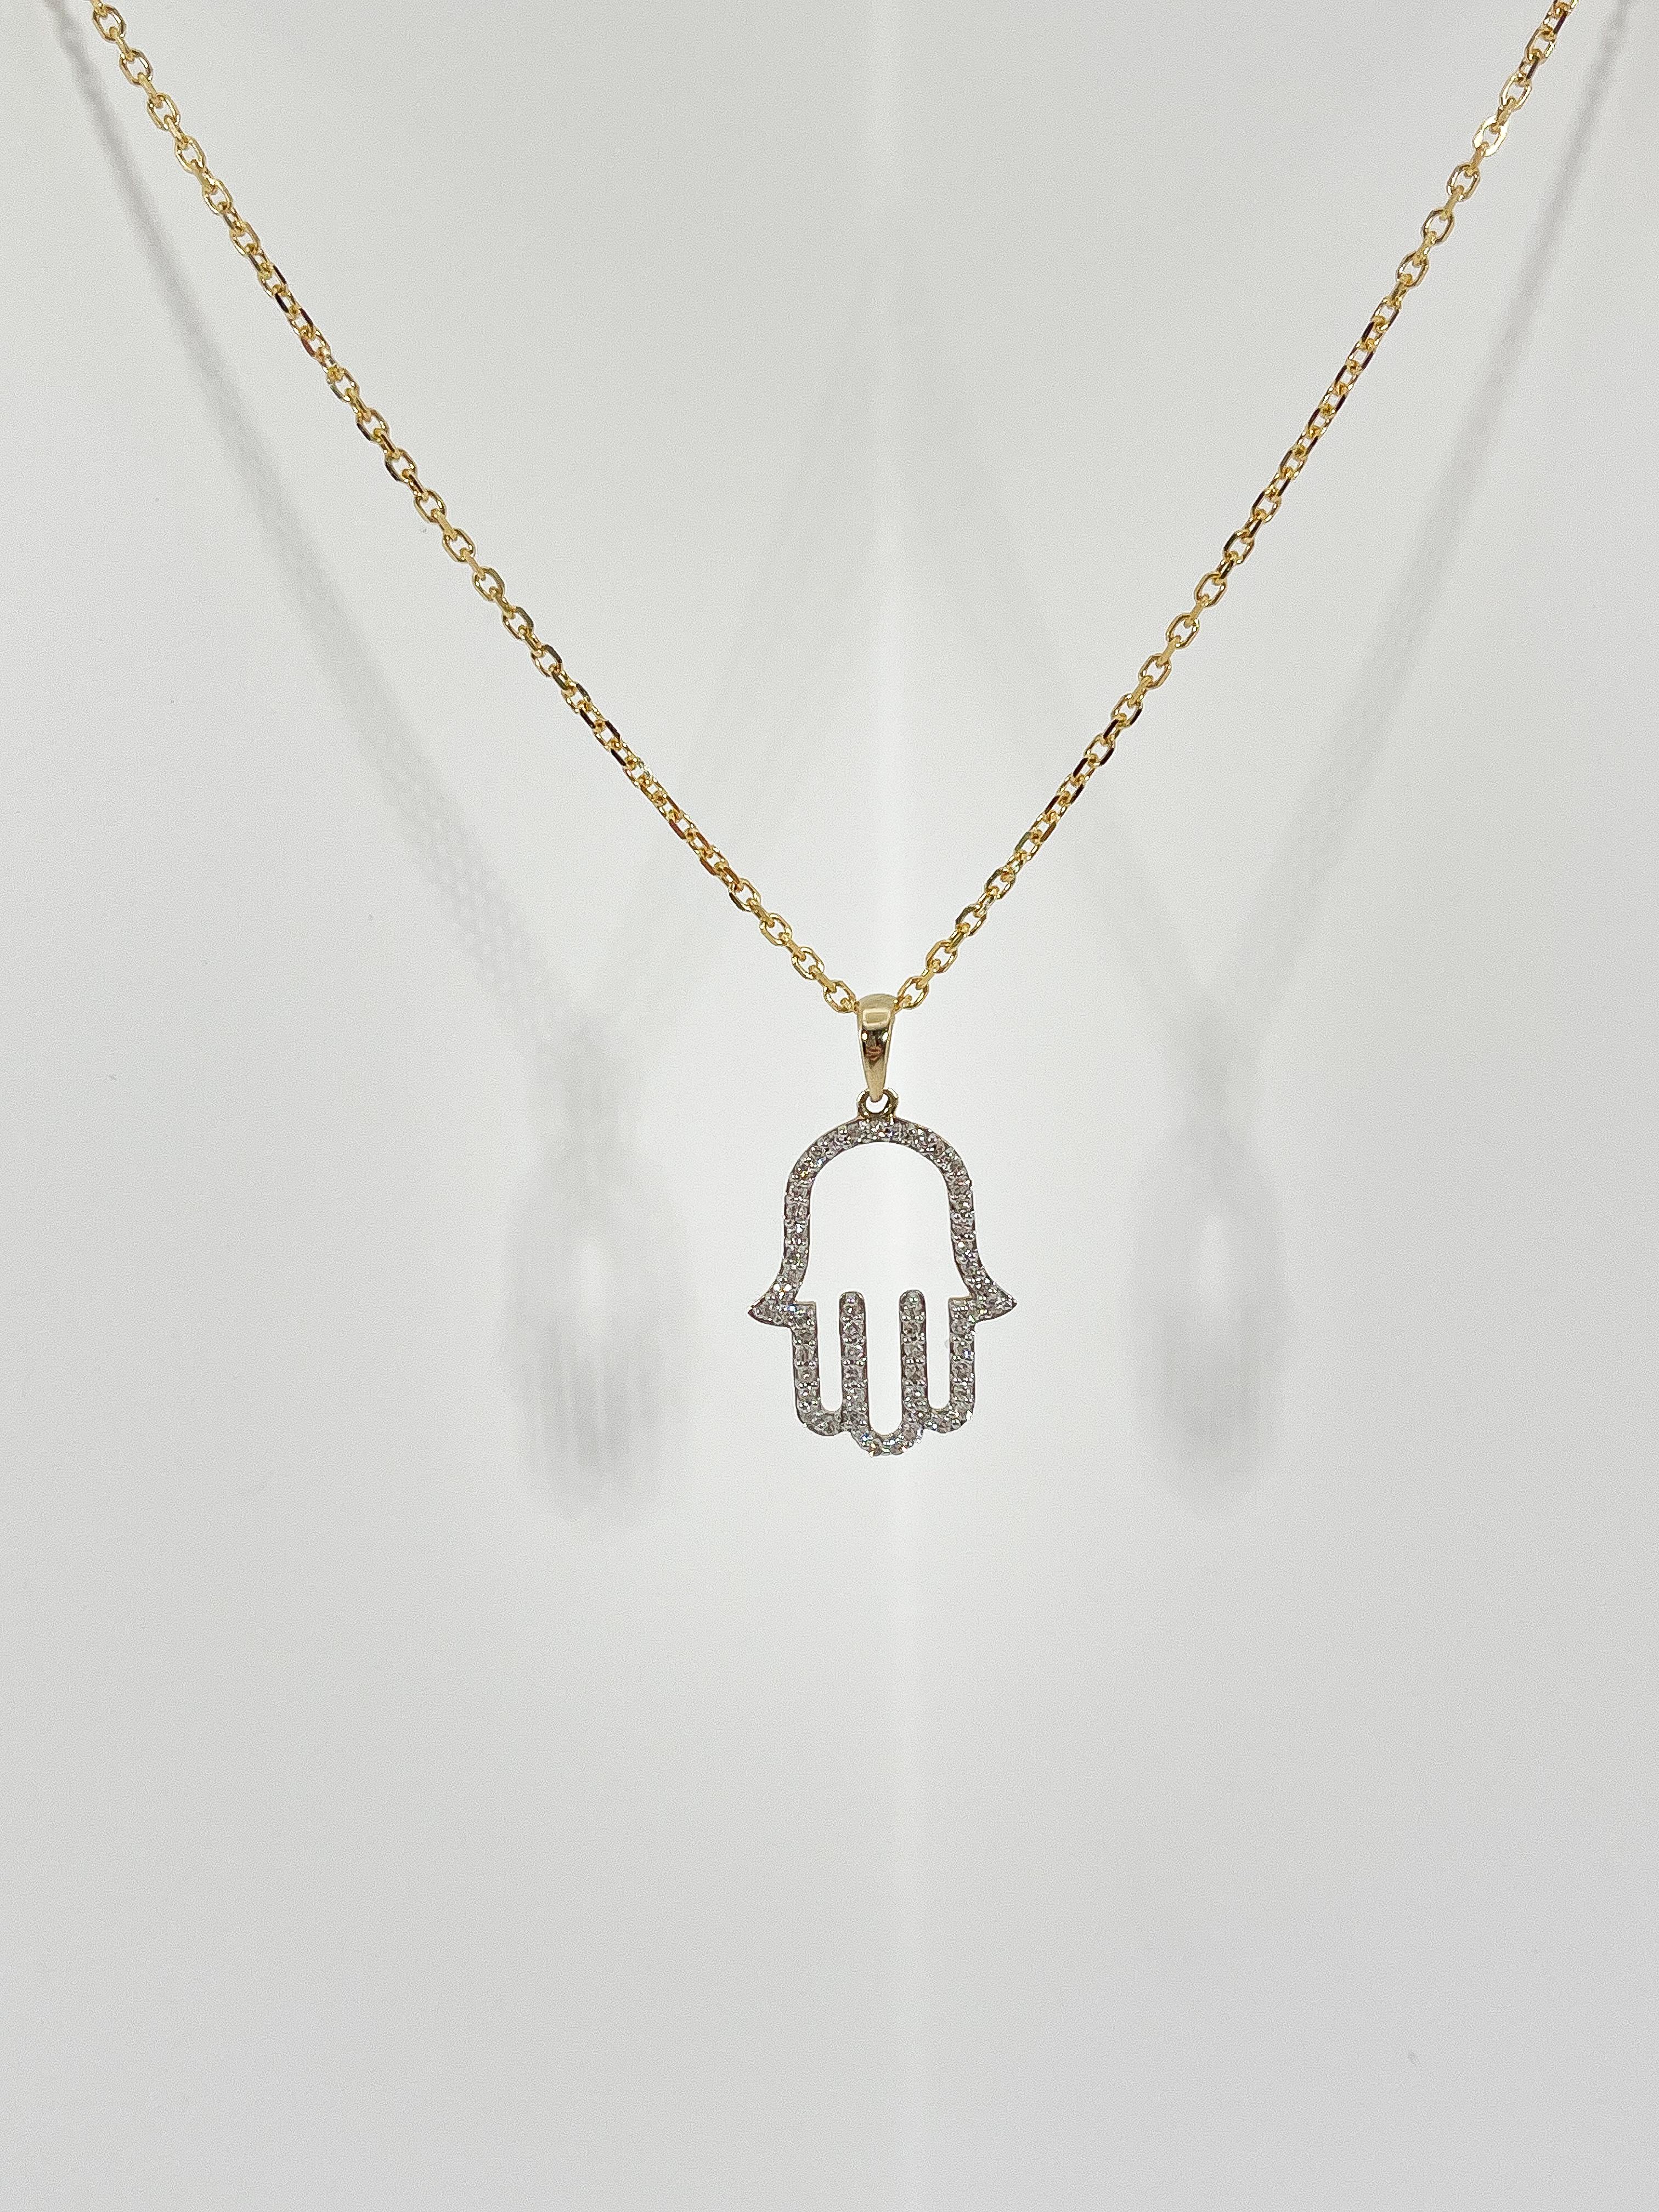 14k yellow gold .21 CTW diamond hamsa necklace. The  pendant comes on a cable chain, the diamonds in the pendant are all round cut, the length of the necklace is 16 inches, measurements of the pendant are 17.5 x 13.5 mm, and the necklace has a total